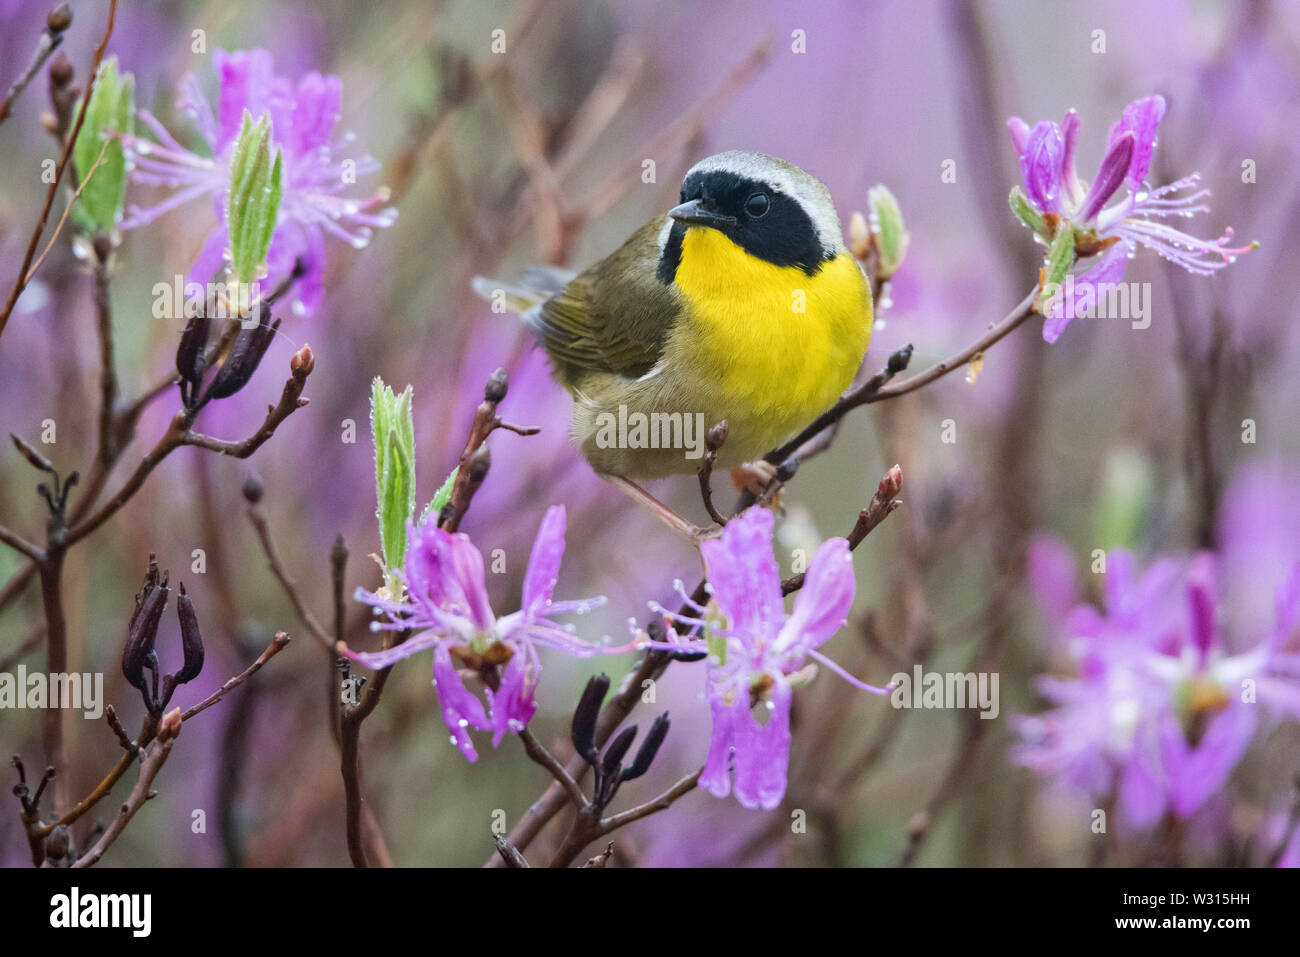 common yellowthroat, Geothlypis trichas, male, perched on pinkish-purple rhodora flowers, Rhododendron canadense, Nova Scotia, Canada Stock Photo